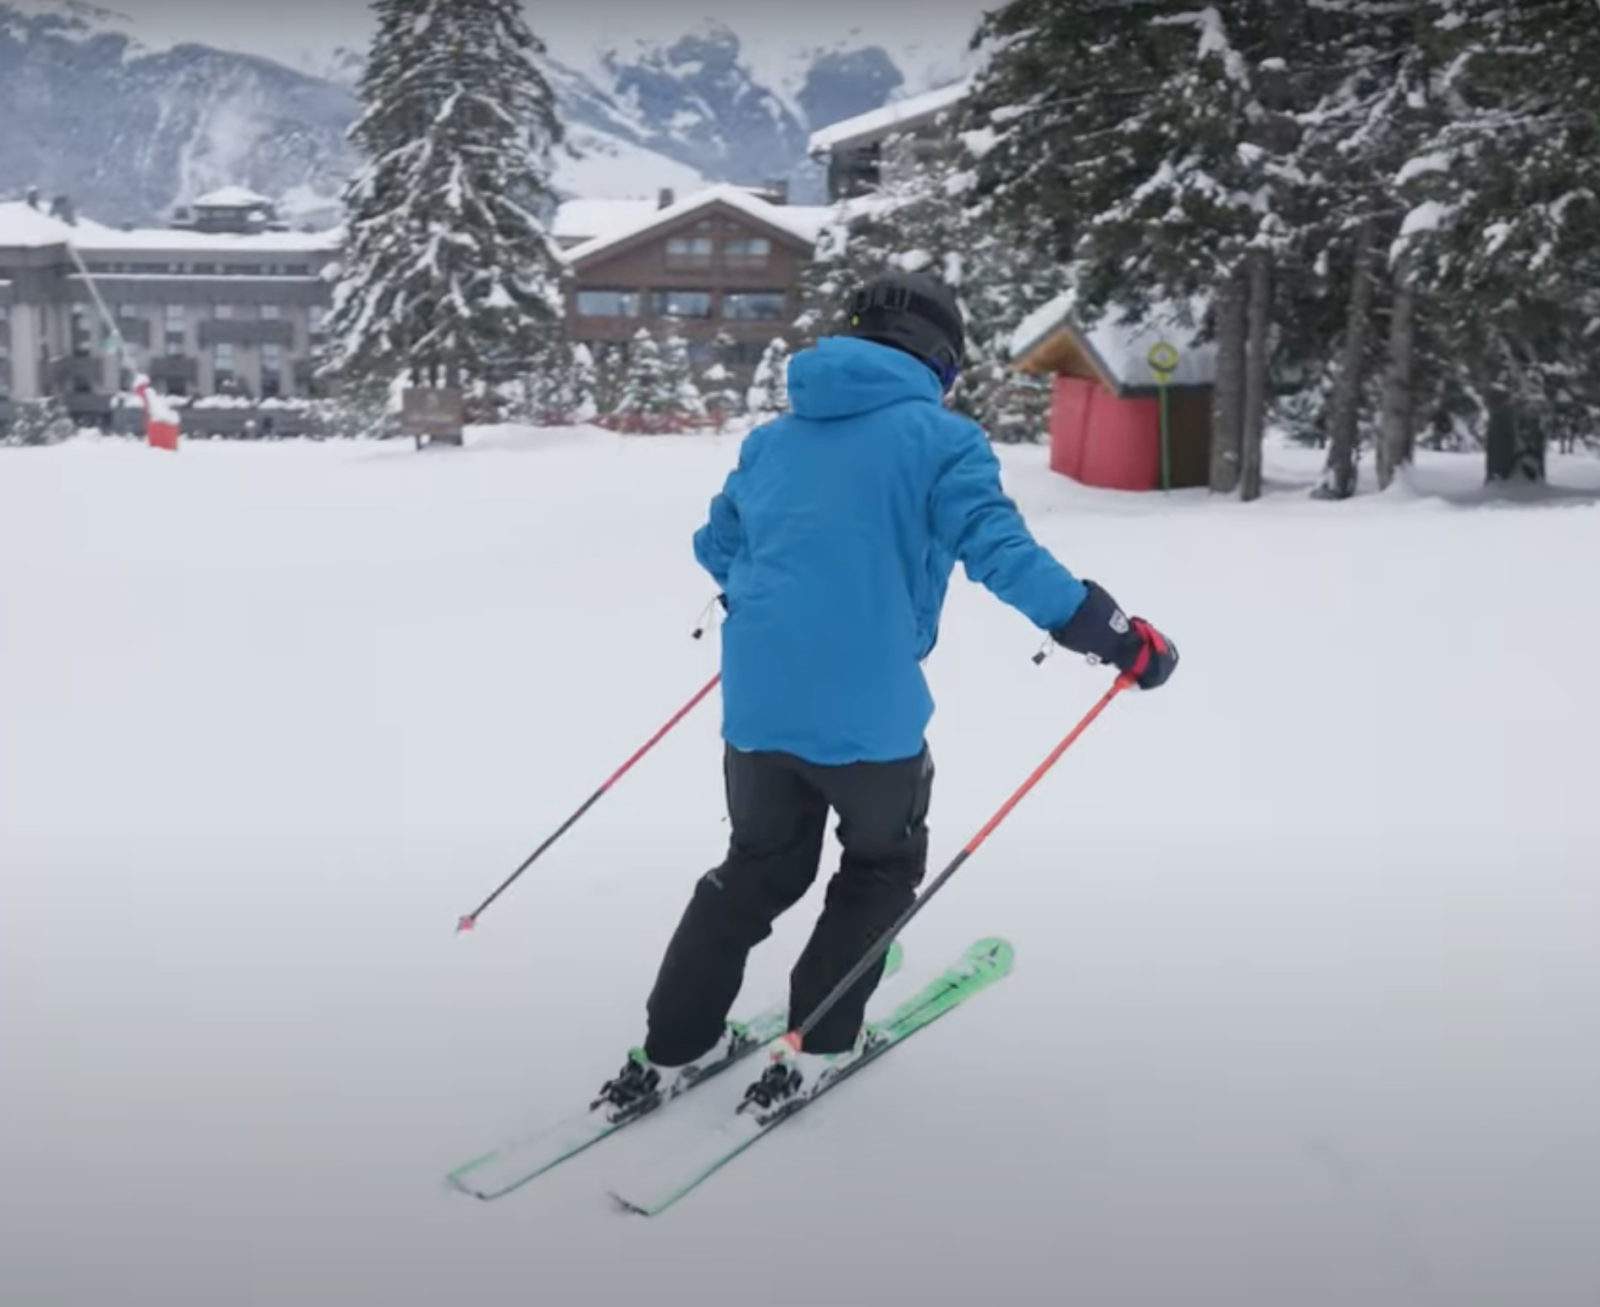 How to Progress from Snow Plough to Parallel Skiing